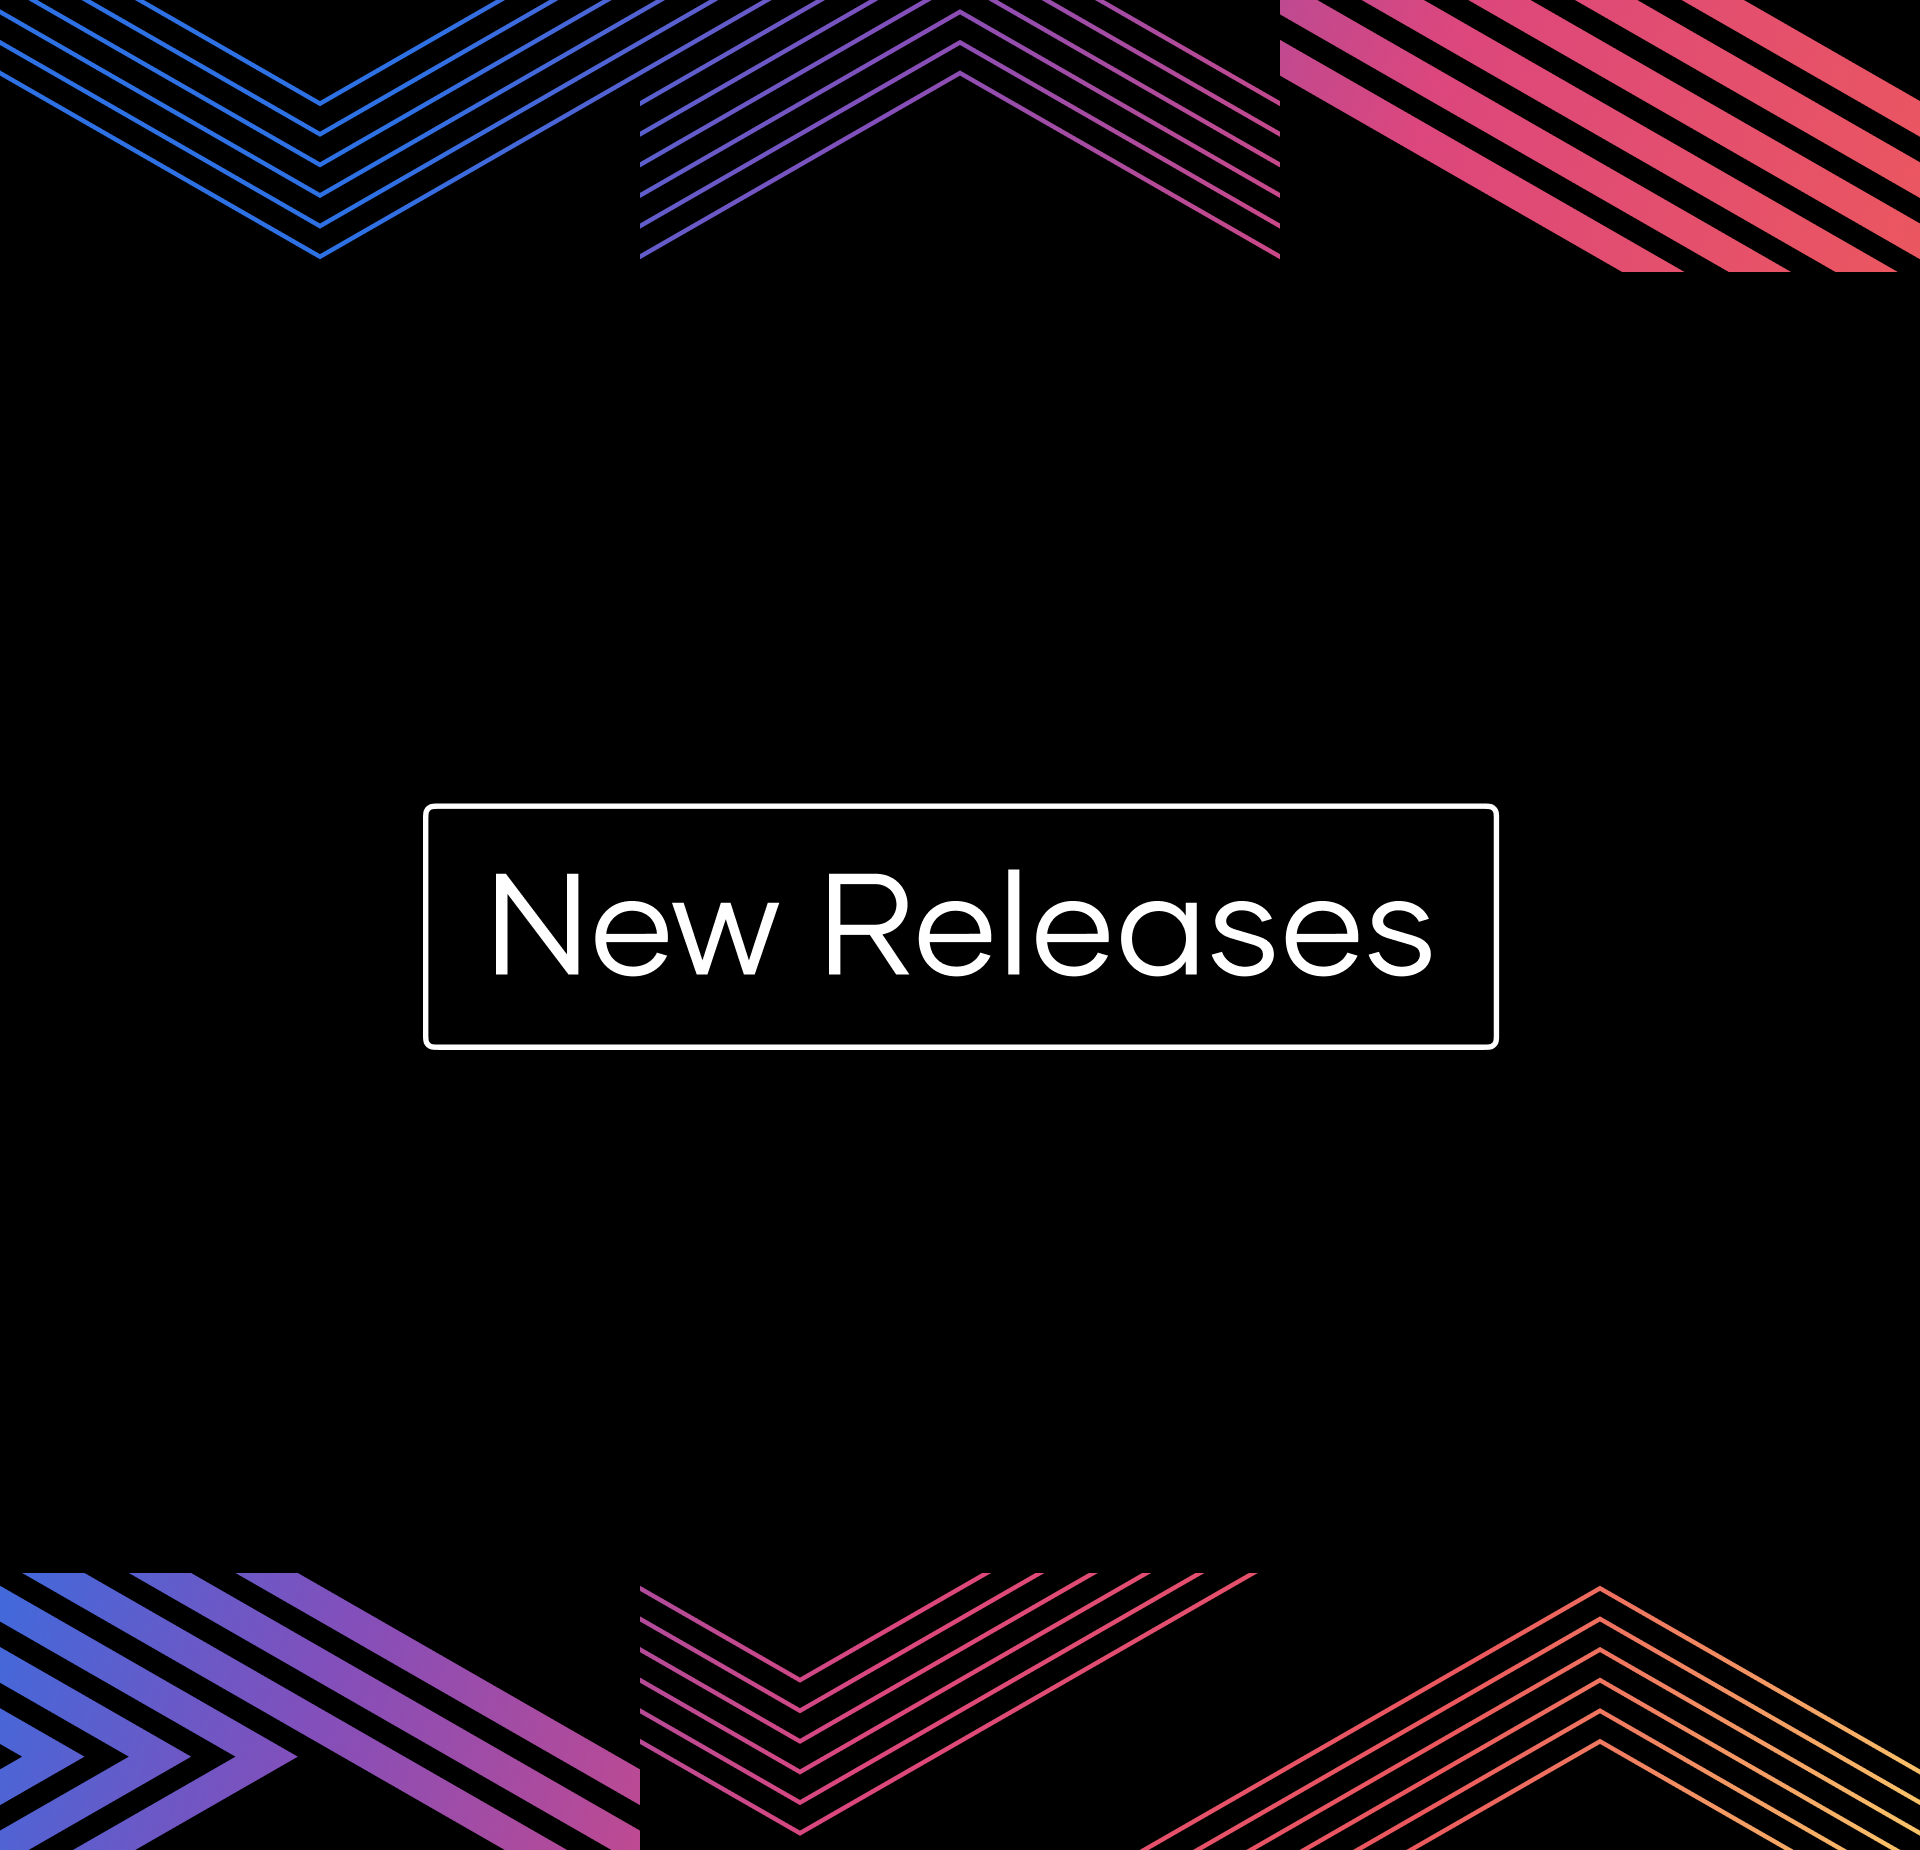 Black image with colorful border for HashiCorp New Releases